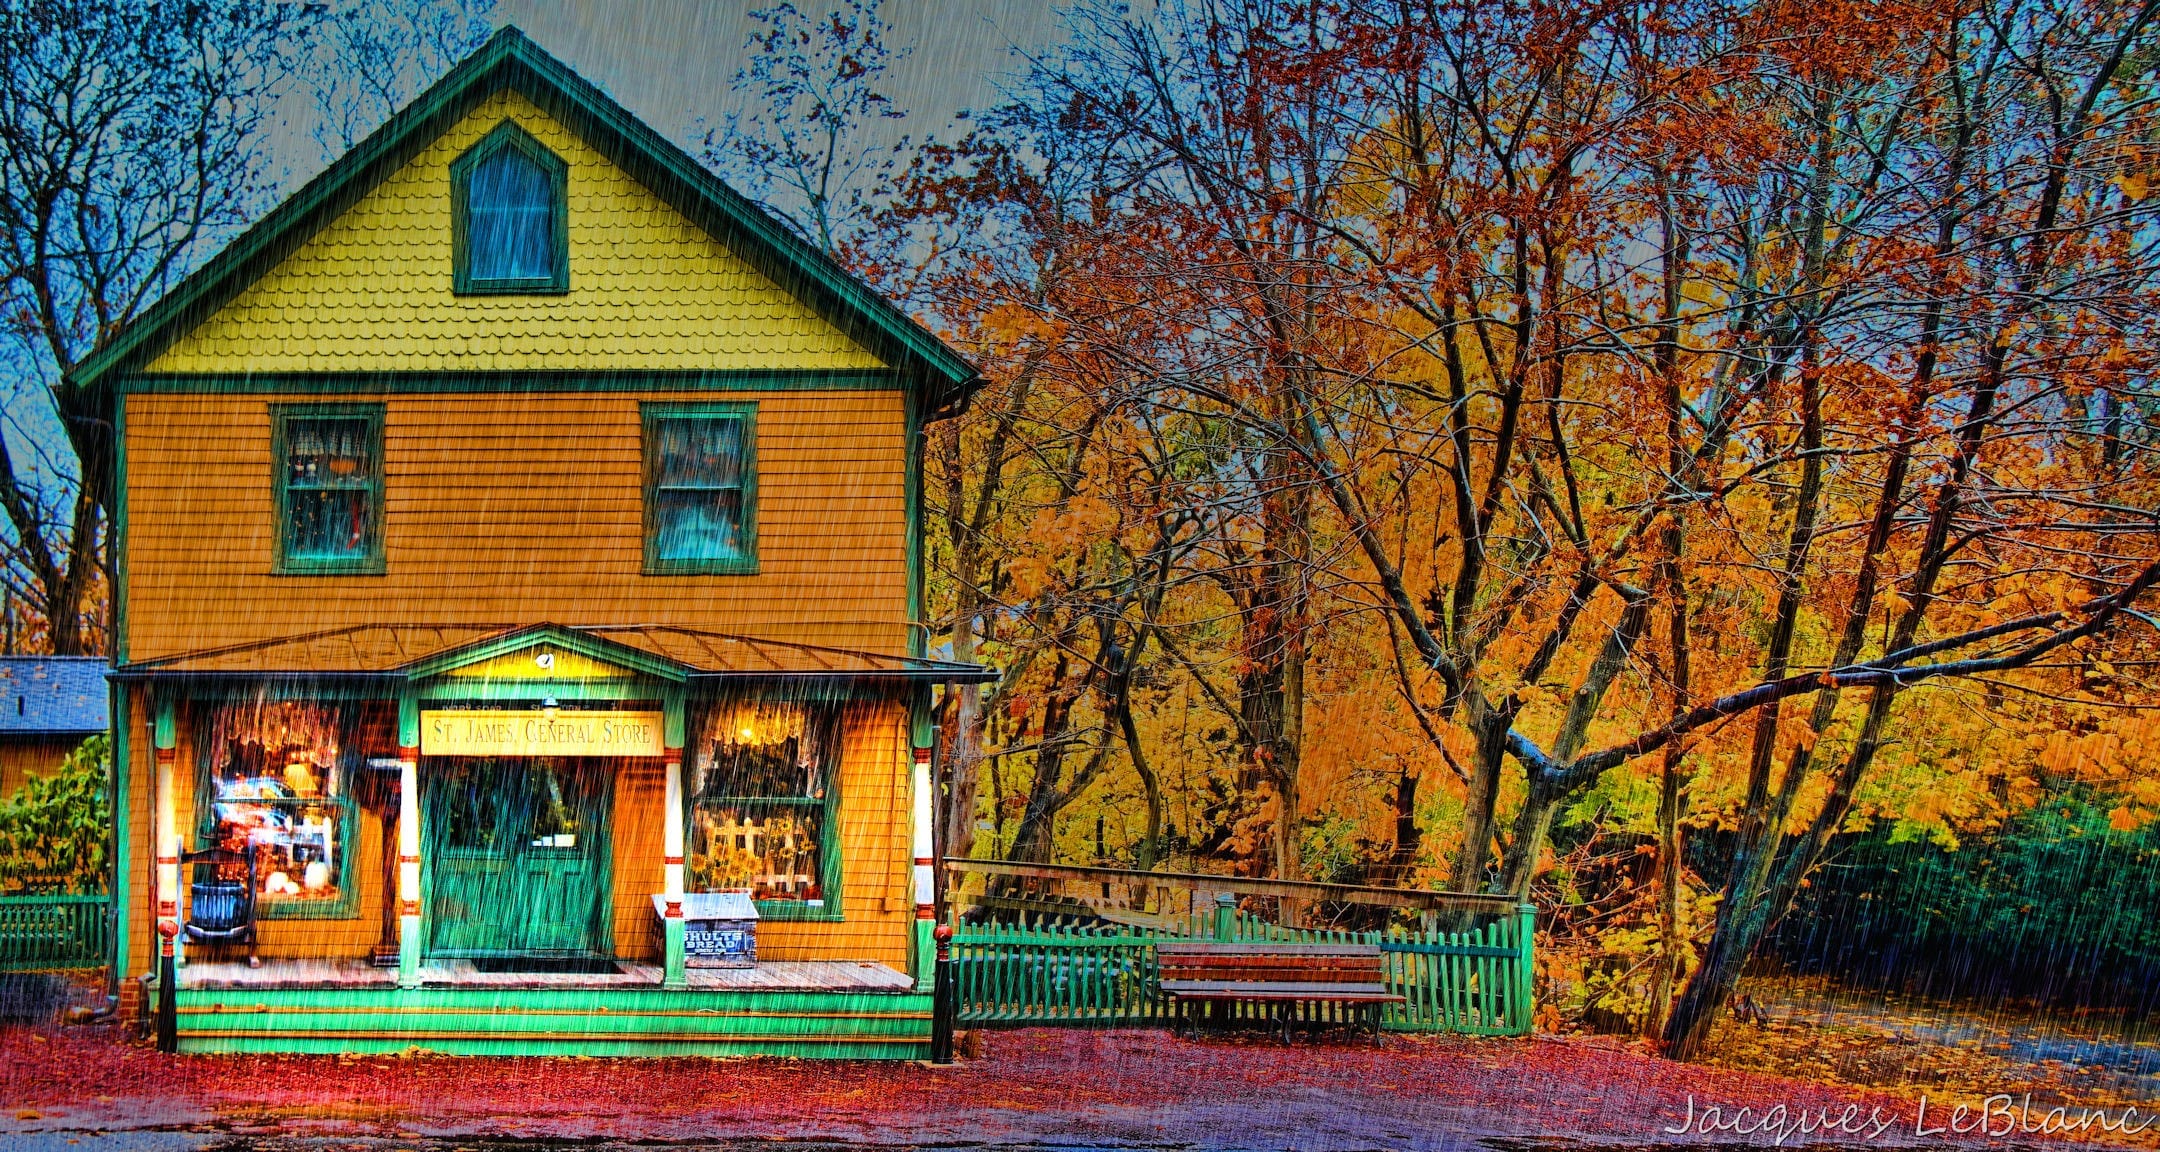 The St. James General Store is captured just before dark on a rainy fall day that brings out the best of it's authentic Victorian colors that closely matches th